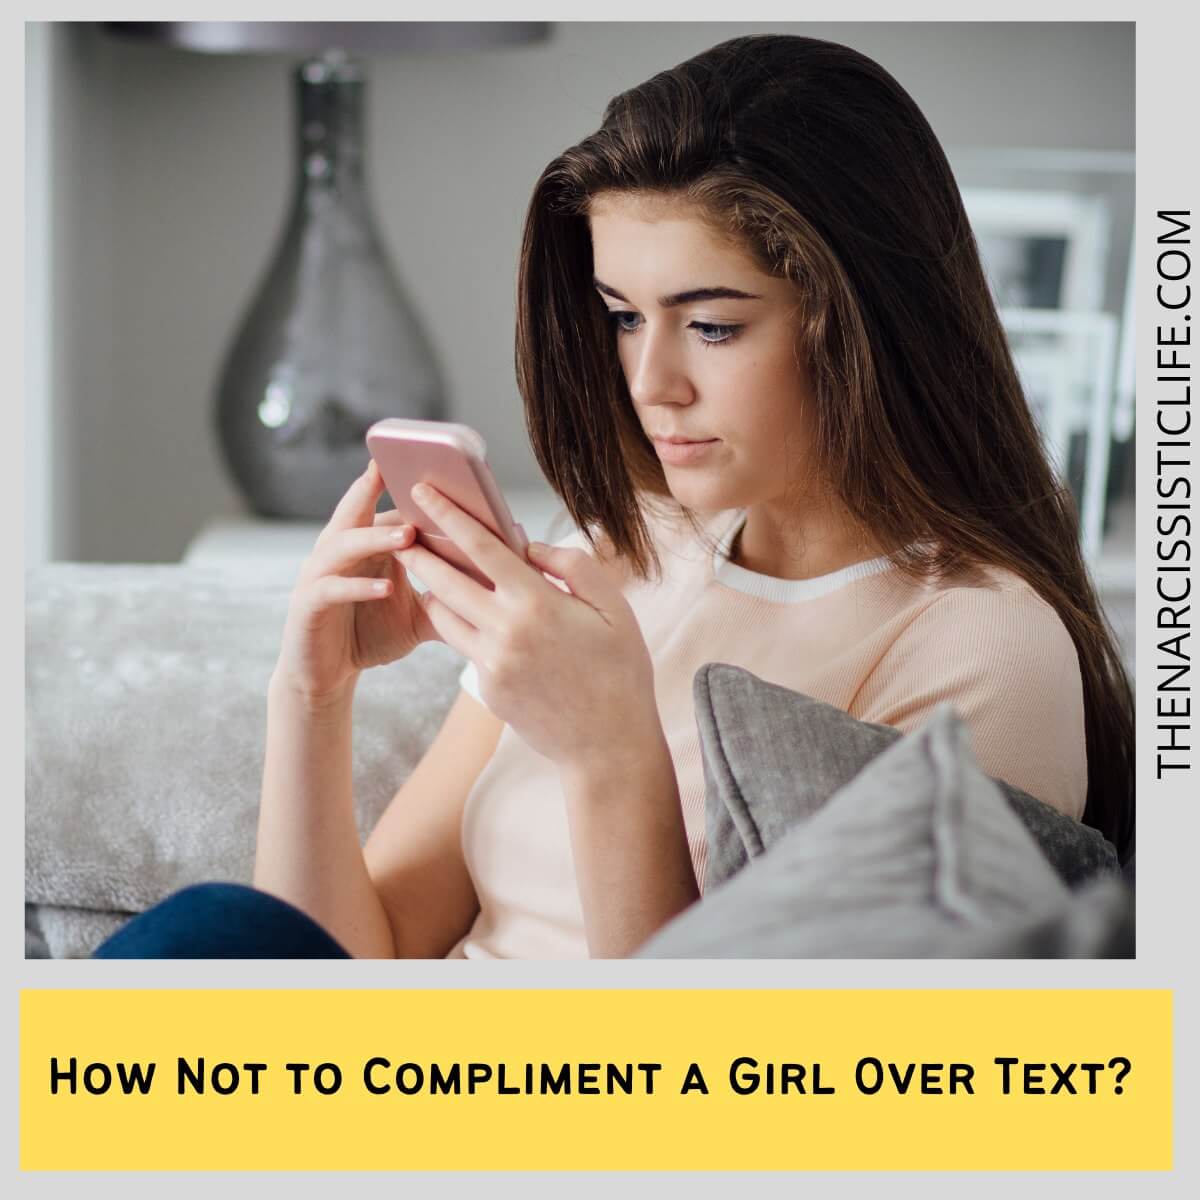 How To Compliment A Girl Over Text? - The Narcissistic Life